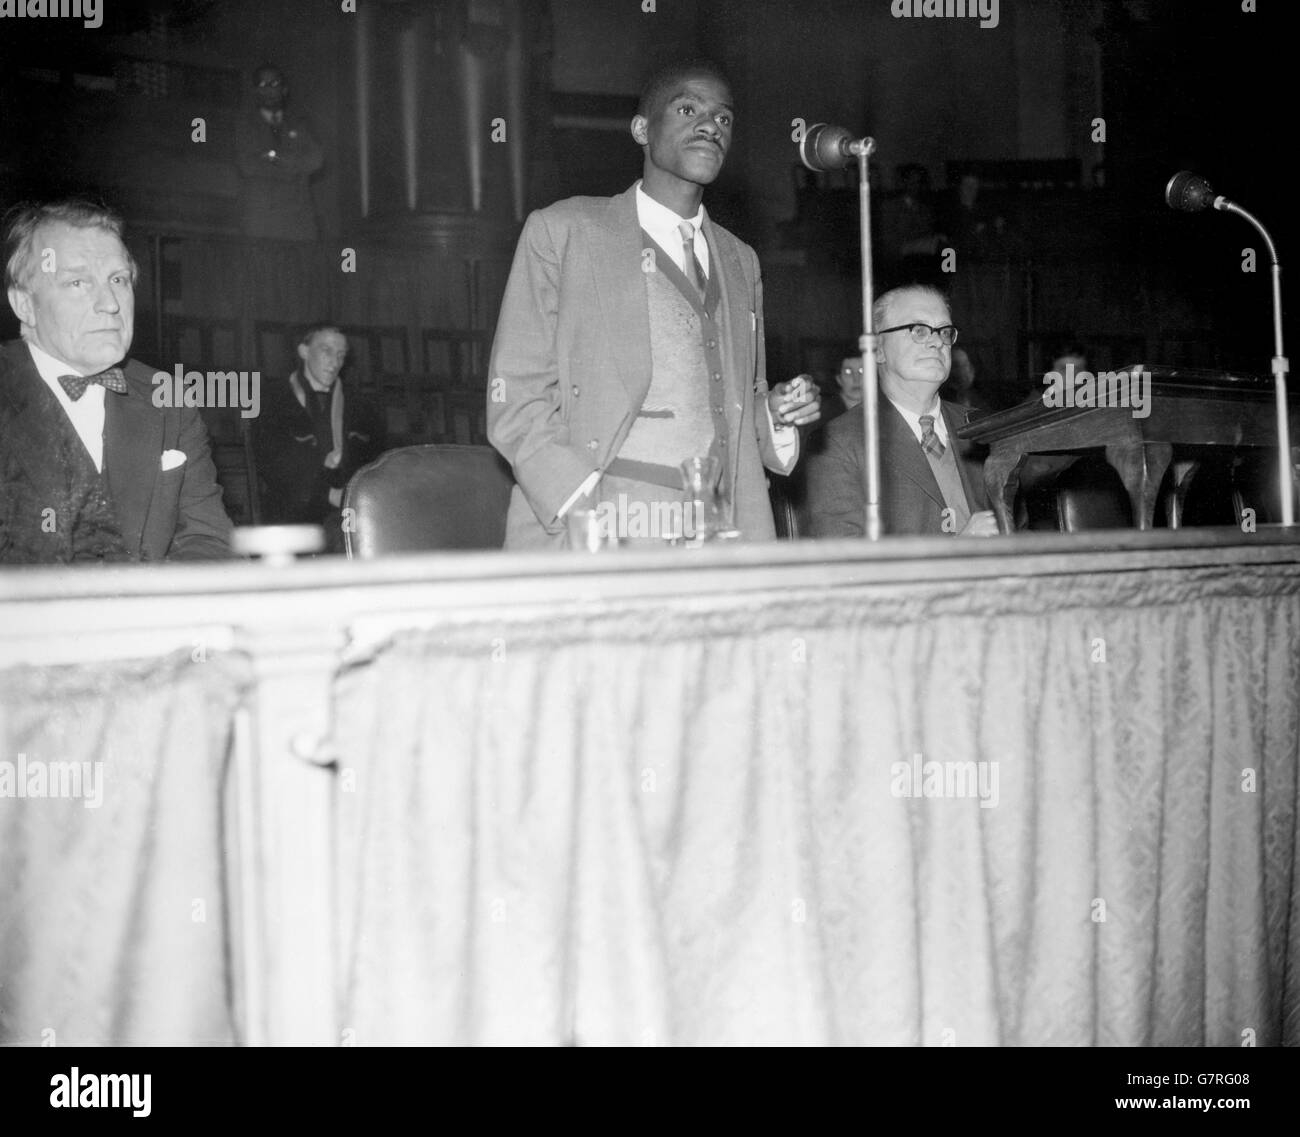 Kanyama Chiume (right) speaking at a meeting for the Movement for Colonial Freedom and Committee for African Organisations Meeting at Central Hall, Westminster, London. Kanyama Chiume is the 29 year old member of the Nyasaland Legislative Council and publicity secretary of the Nyasaland African Congress. The meeting was called to support African demands for the ending of the Central African Federation and full independence for Nyasaland and Northern Rhodesia. Stock Photo